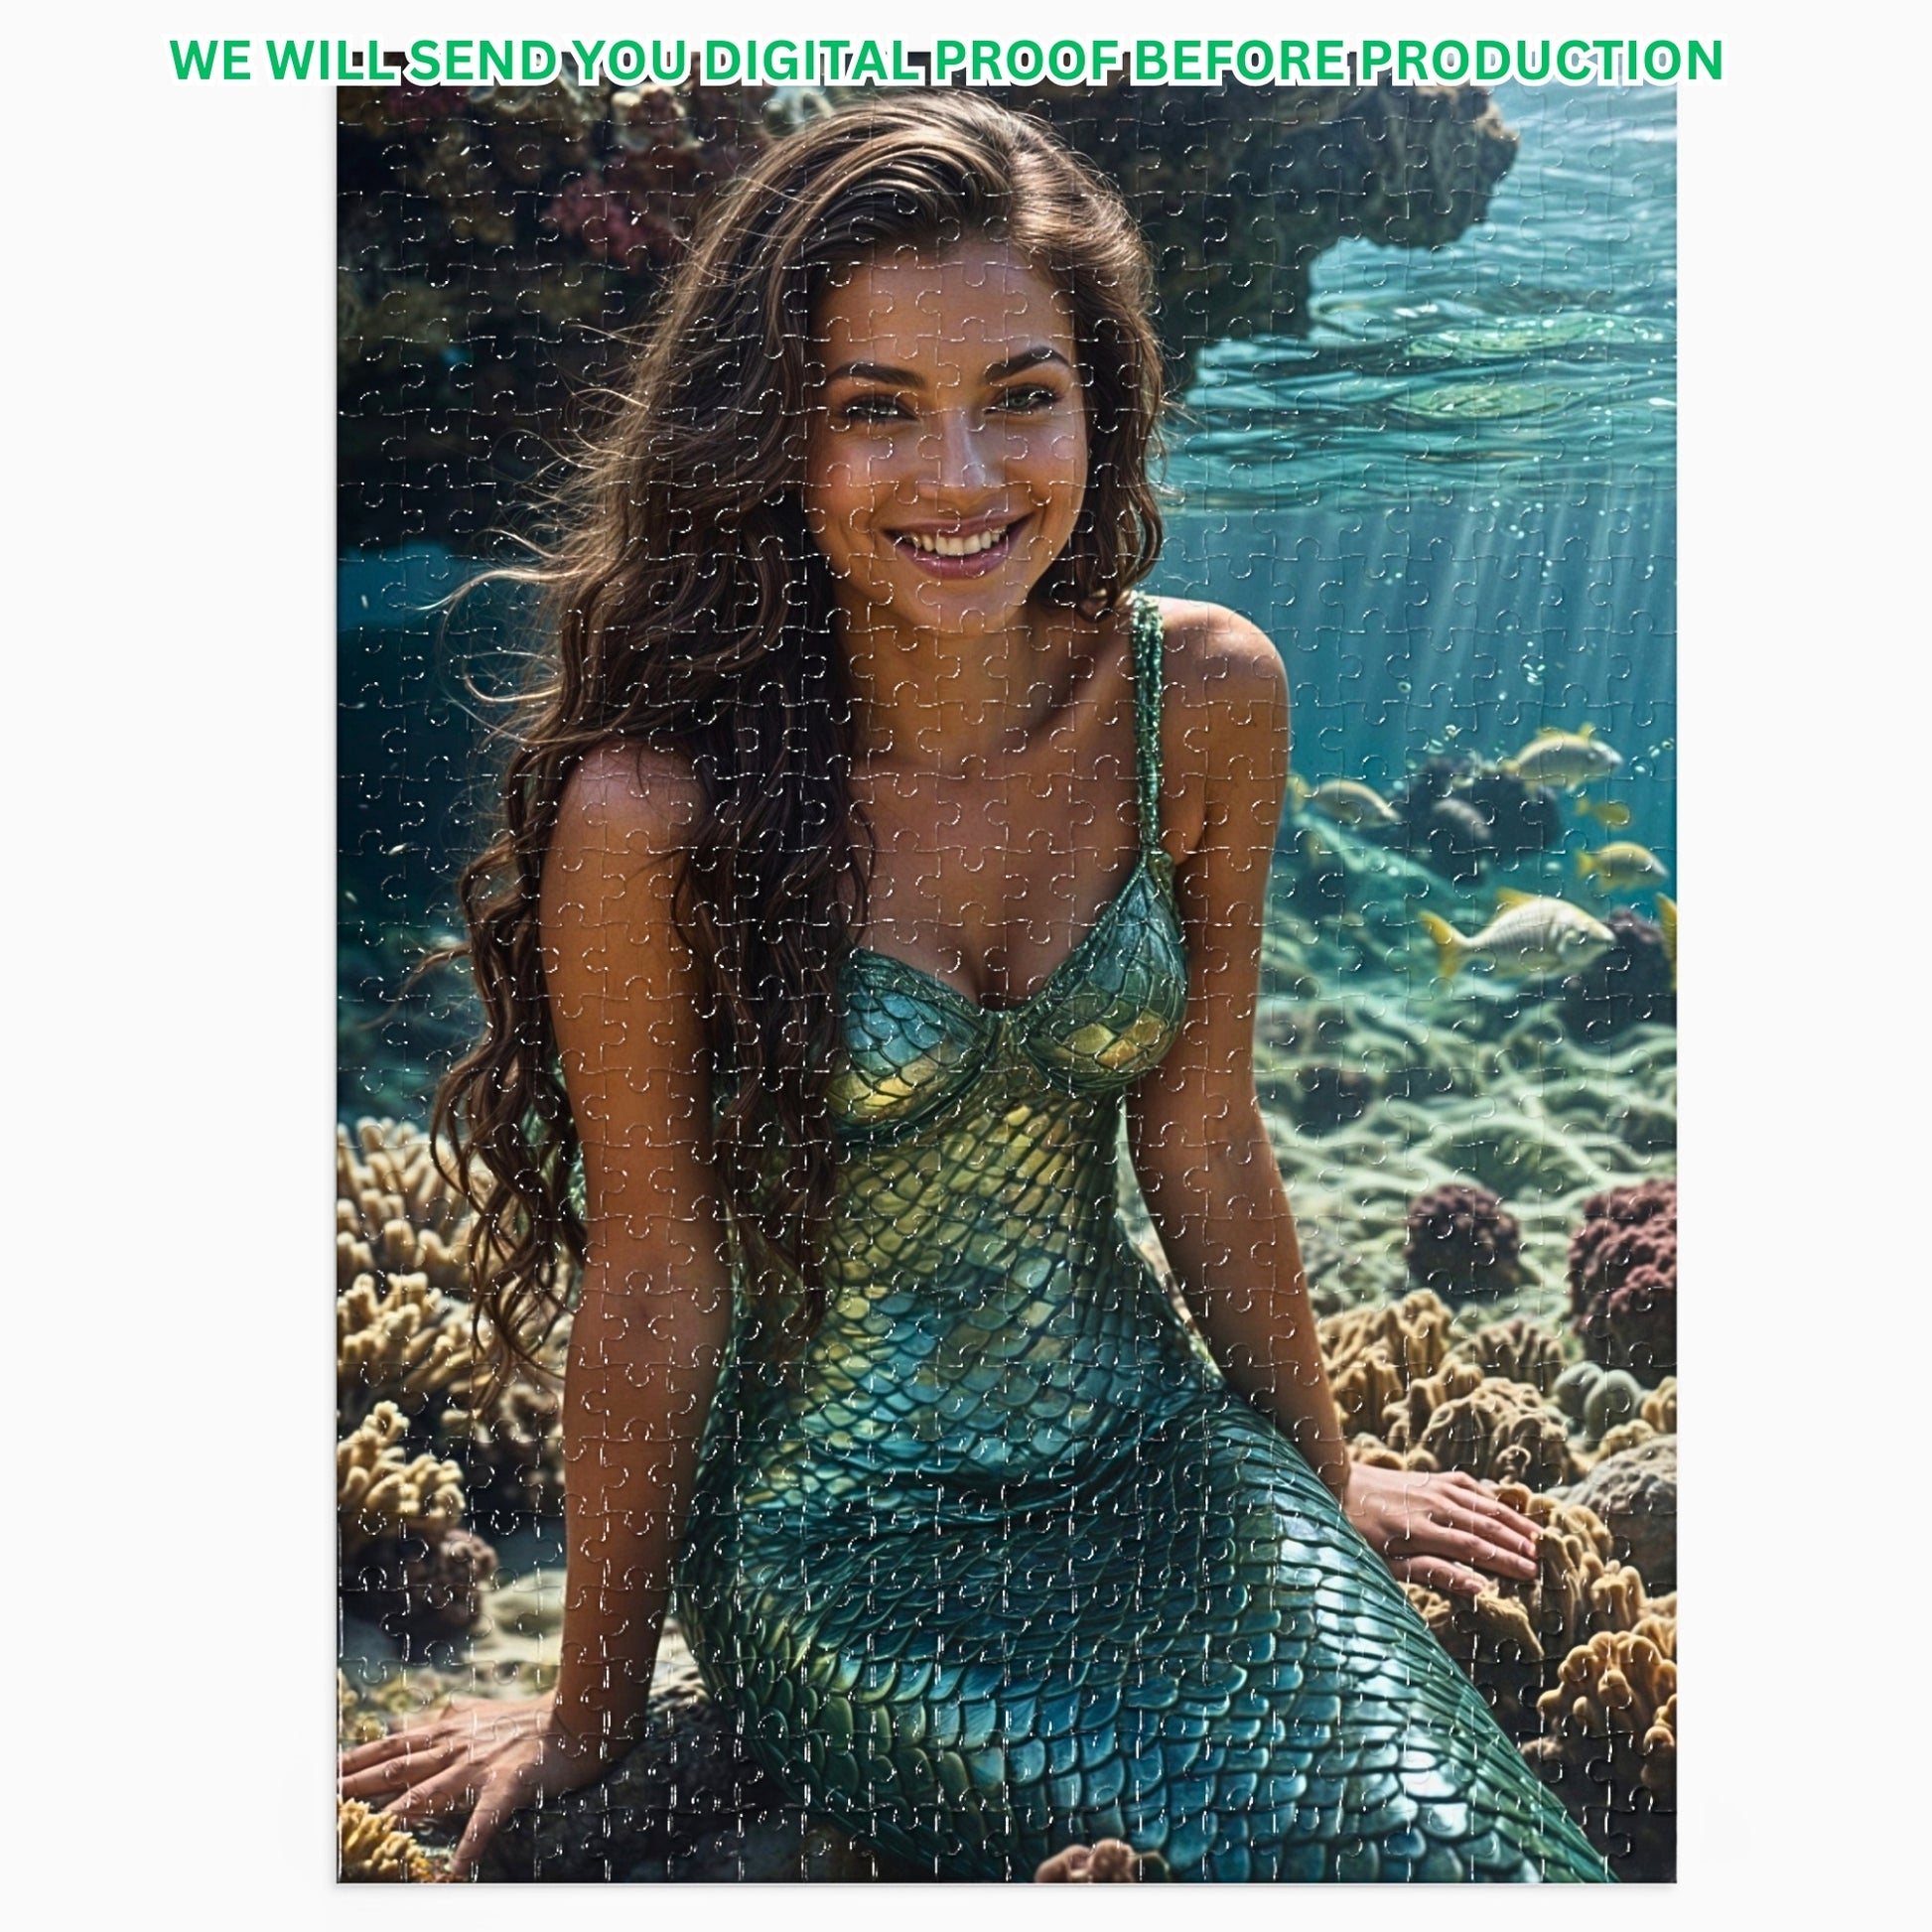 Design your personalized mermaid puzzle from a cherished photo! Tailor a princess portrait for a special birthday surprise. Available in 250 to 1000 pieces. Lady mermaid gifts, princess gifts, and mermaid photo gifts are options. Transform any image into a unique mermaid art puzzle. Perfect for mermaid and princess enthusiasts. Create your custom puzzle today!